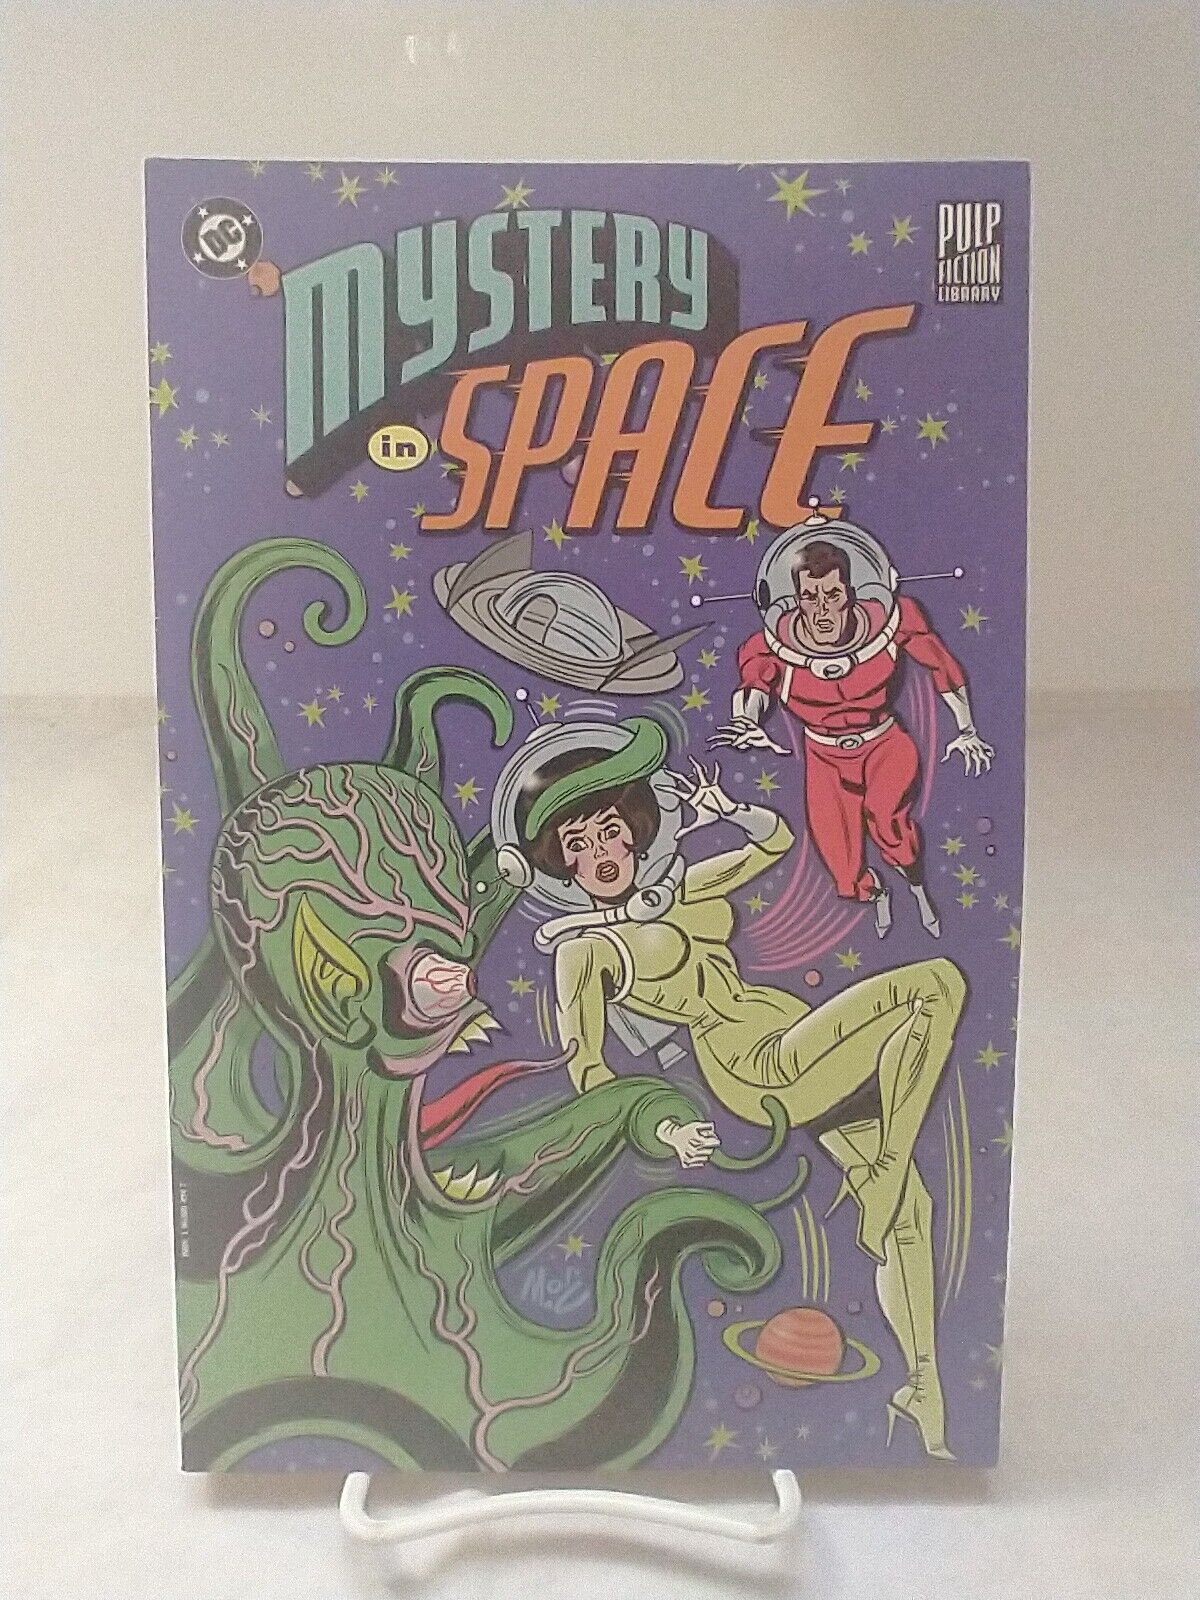 Pulp Fiction Library: Mystery in Space DC Comics Trade Paperback